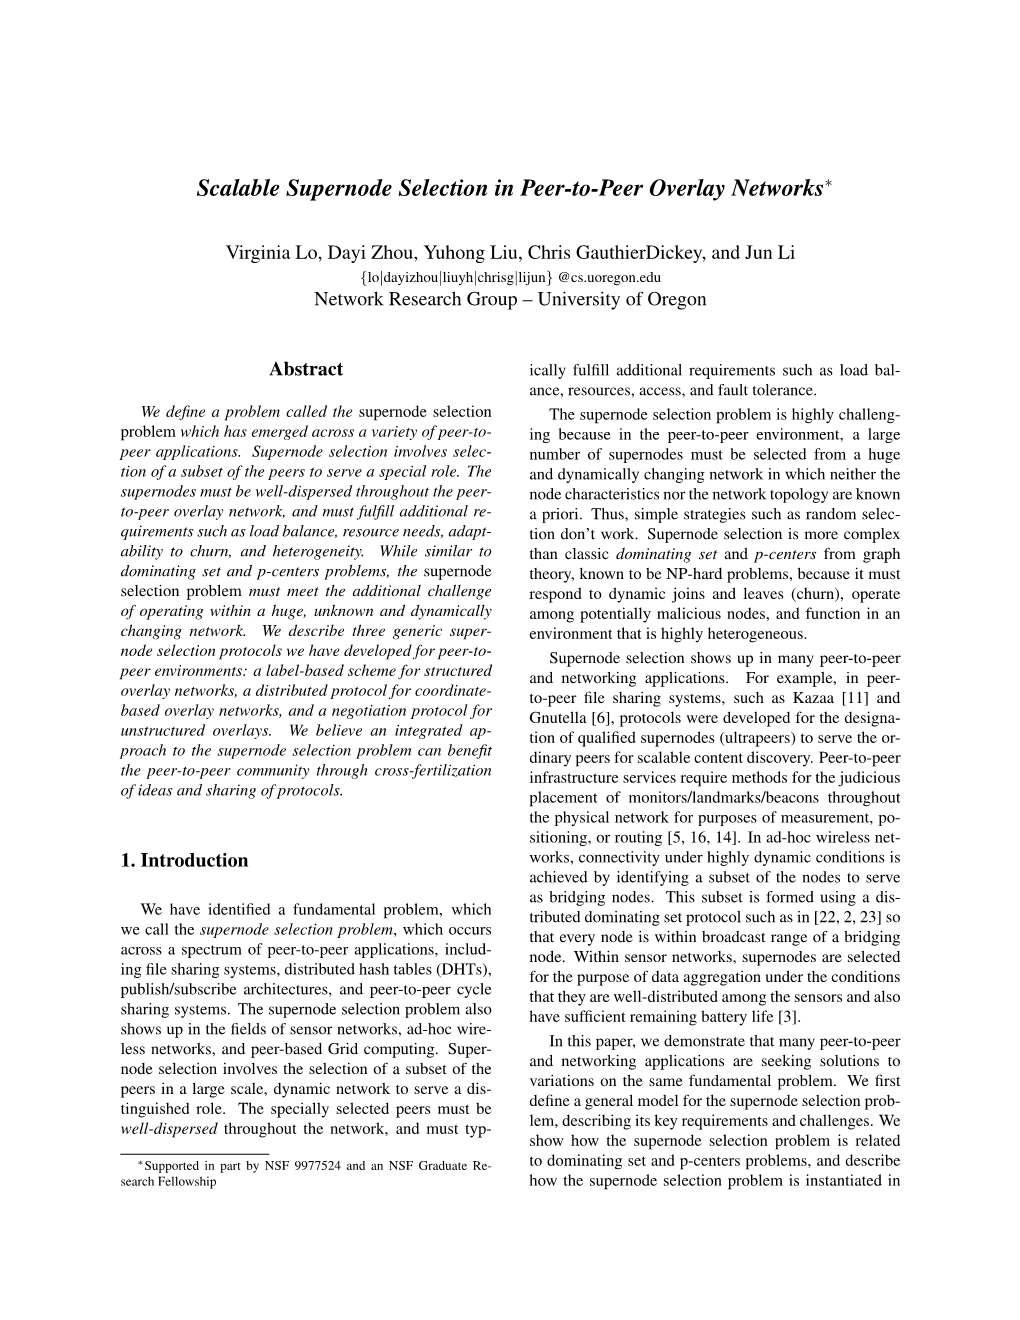 Scalable Supernode Selection in Peer-To-Peer Overlay Networks∗